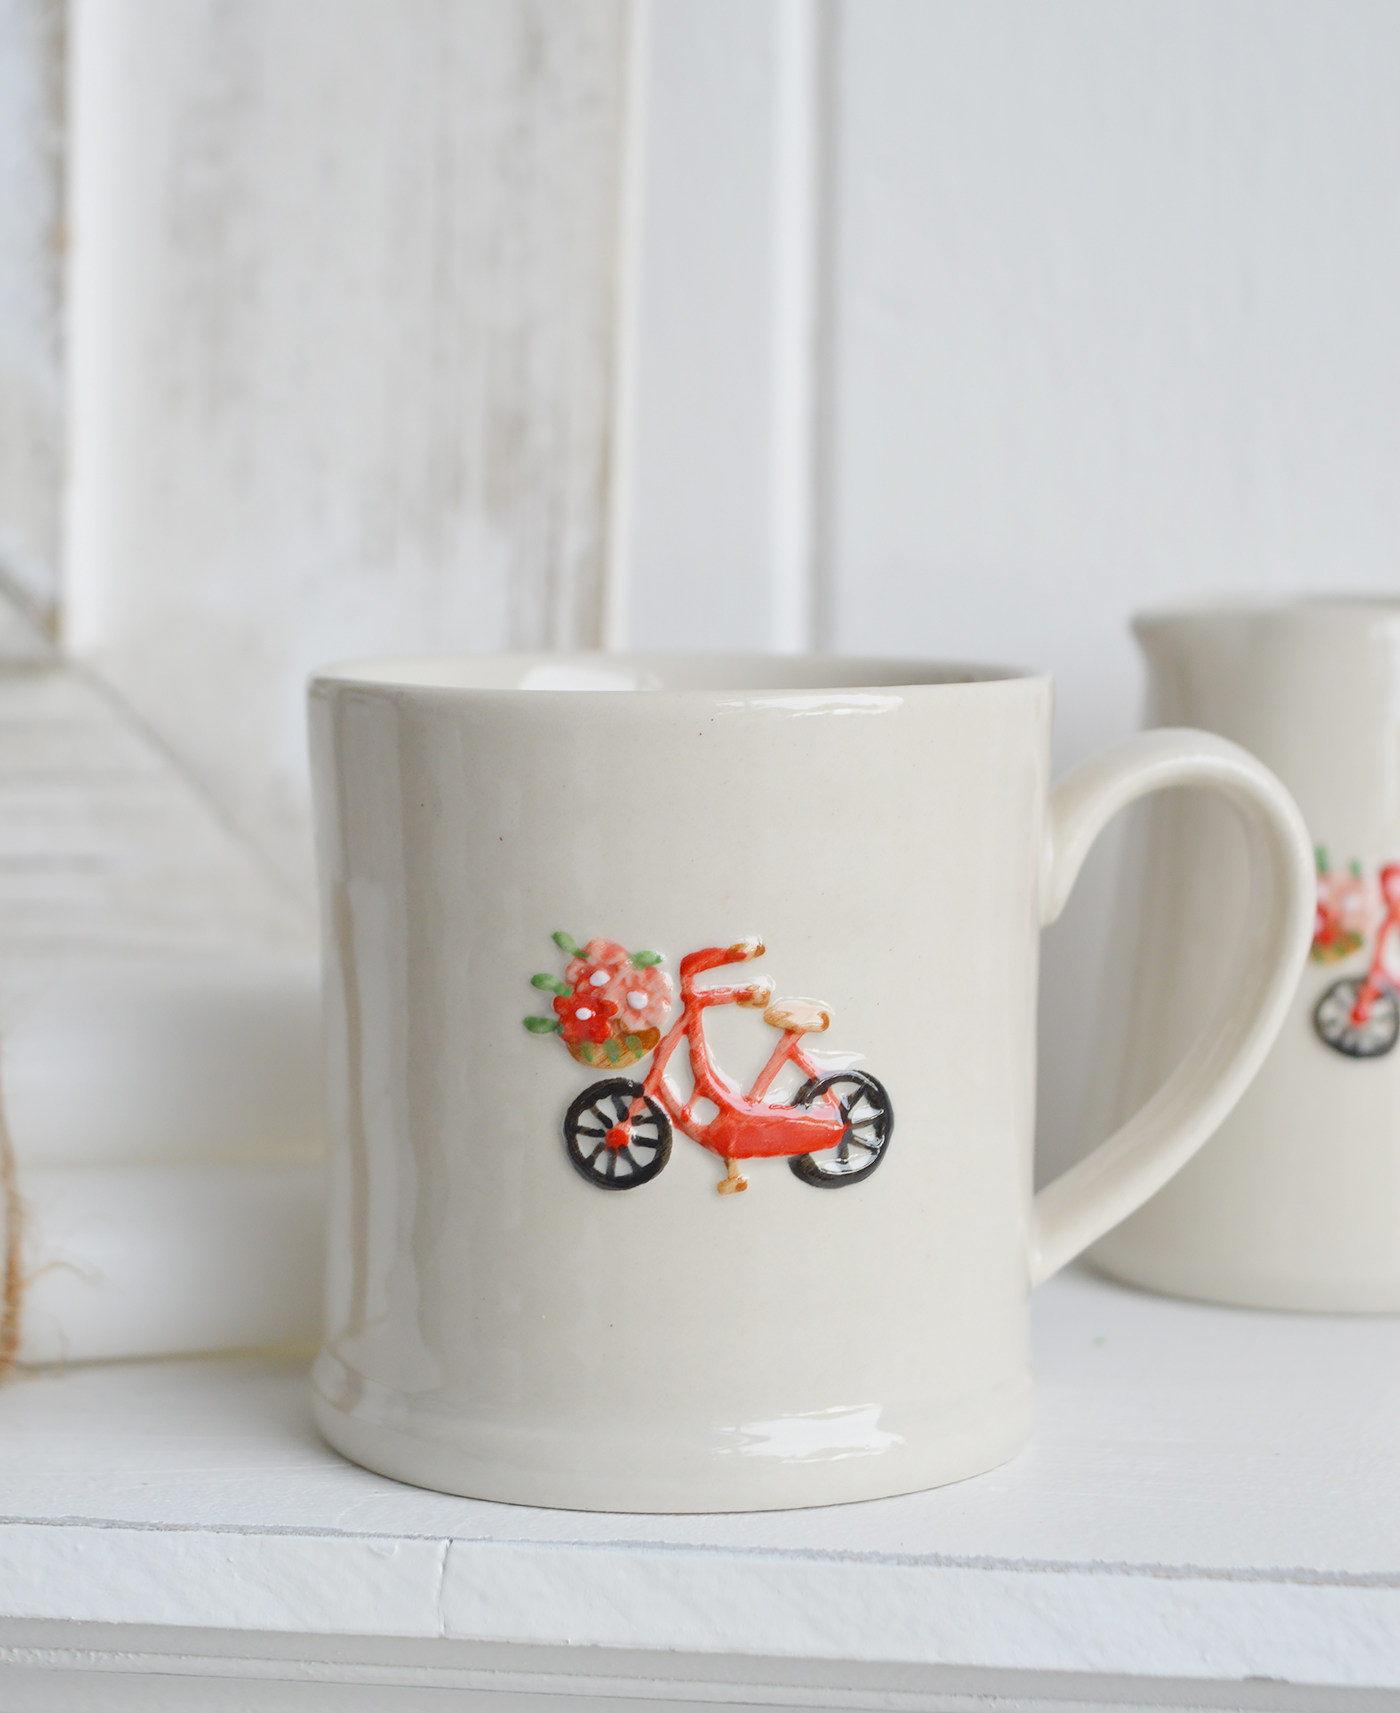 Bicycle Mini mug and milk jug  - Coastal furniture and New England home decor from The White Lighthouse coastal, New England and country furniture and home decor accessories UK